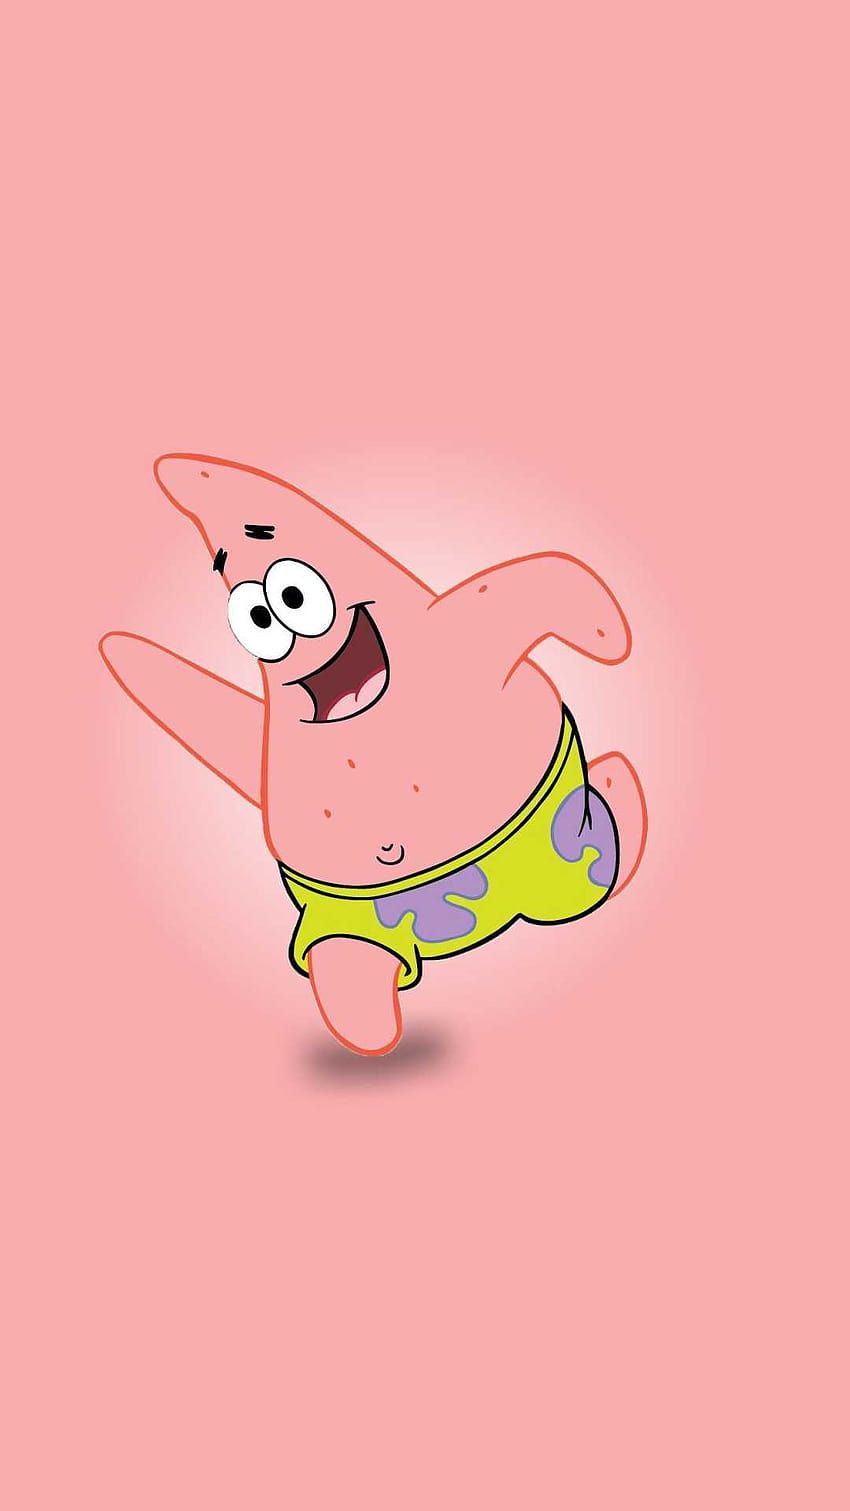 Patrick wallpaper by Thatwallpaperguy  Download on ZEDGE  9aa4